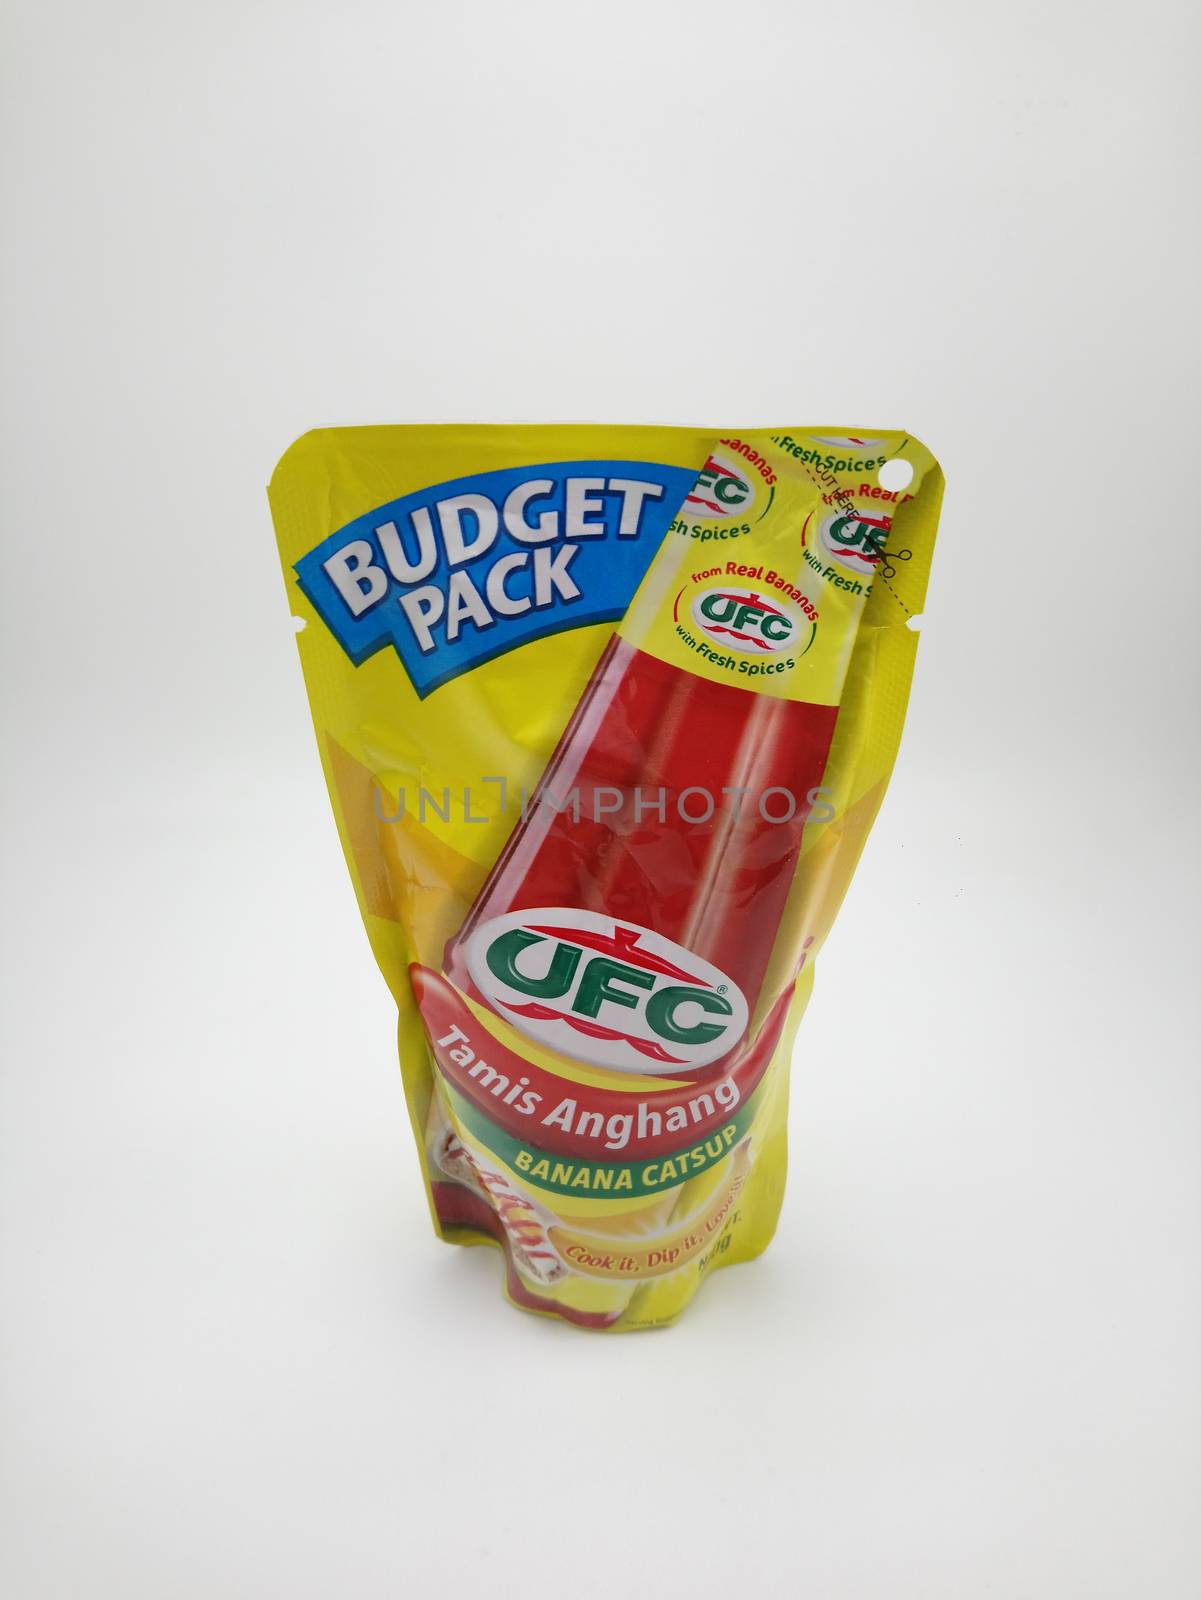 UFC banana ketchup budget pack in Manila, Philippines by imwaltersy